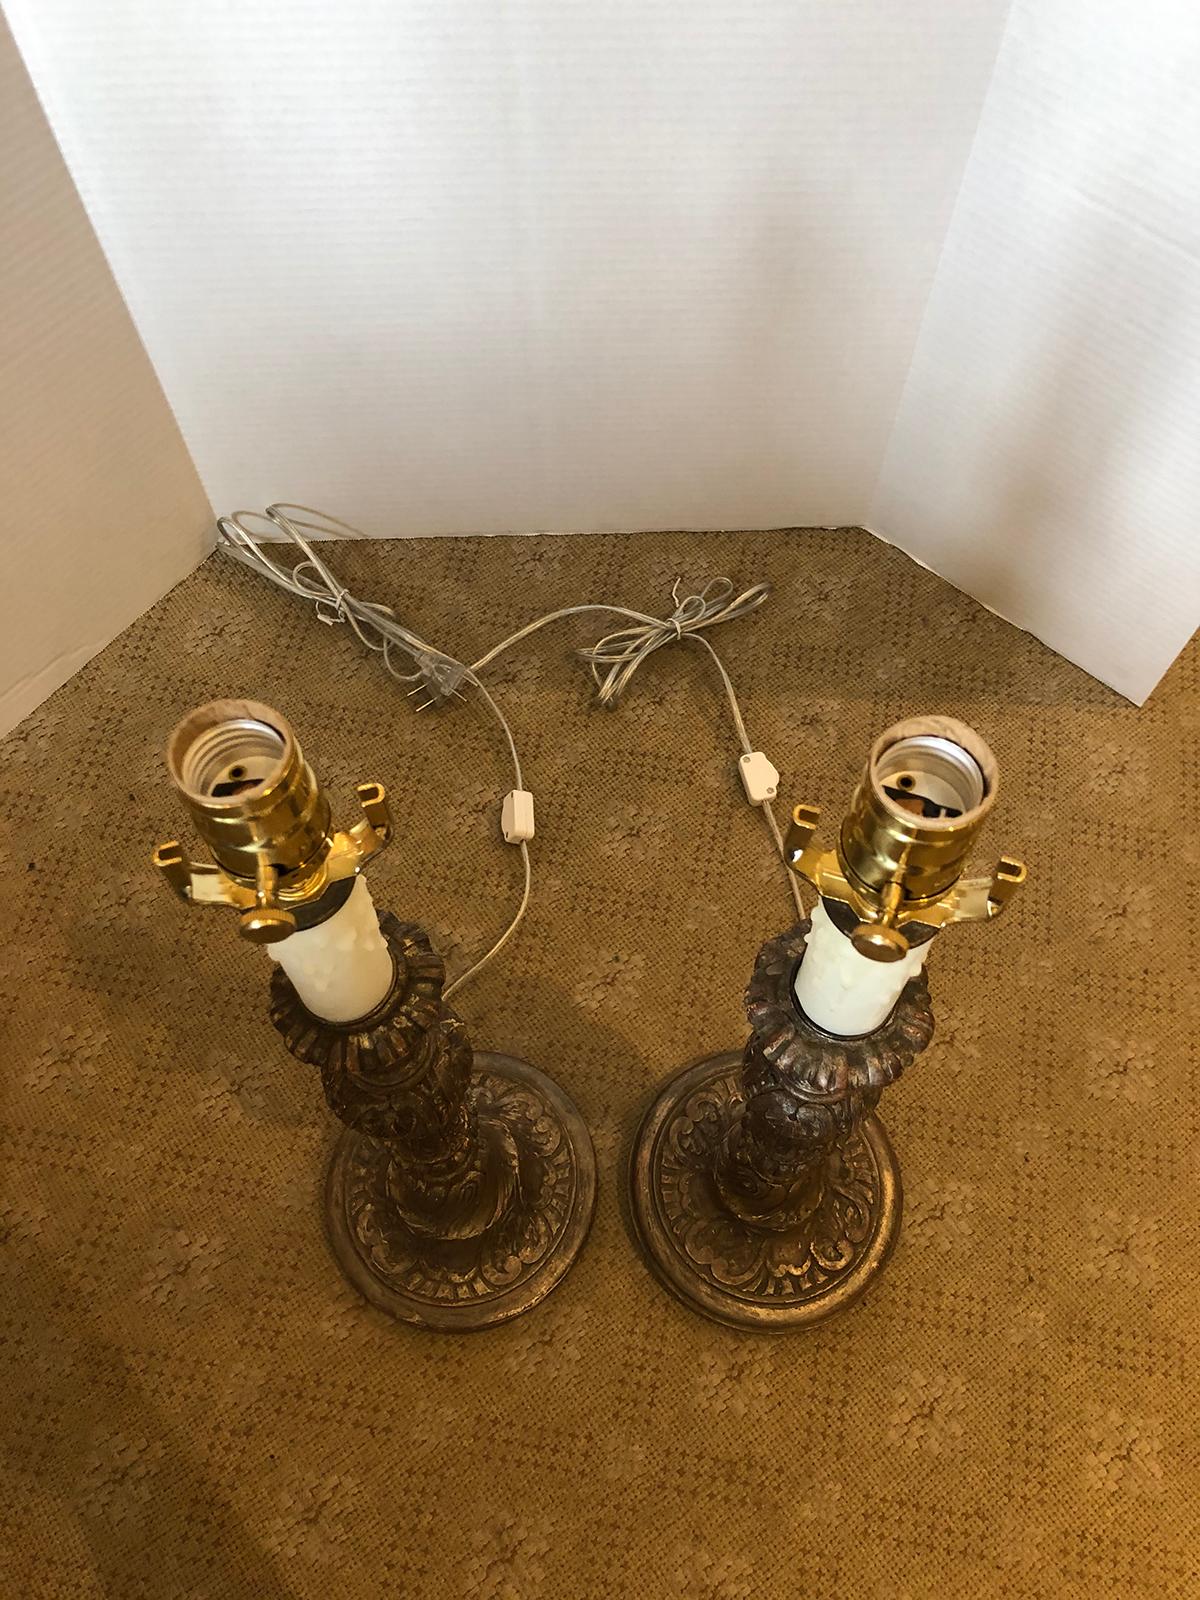 Pair of Early 20th Century Italian Silver Gilt Candlestick Lamps 8